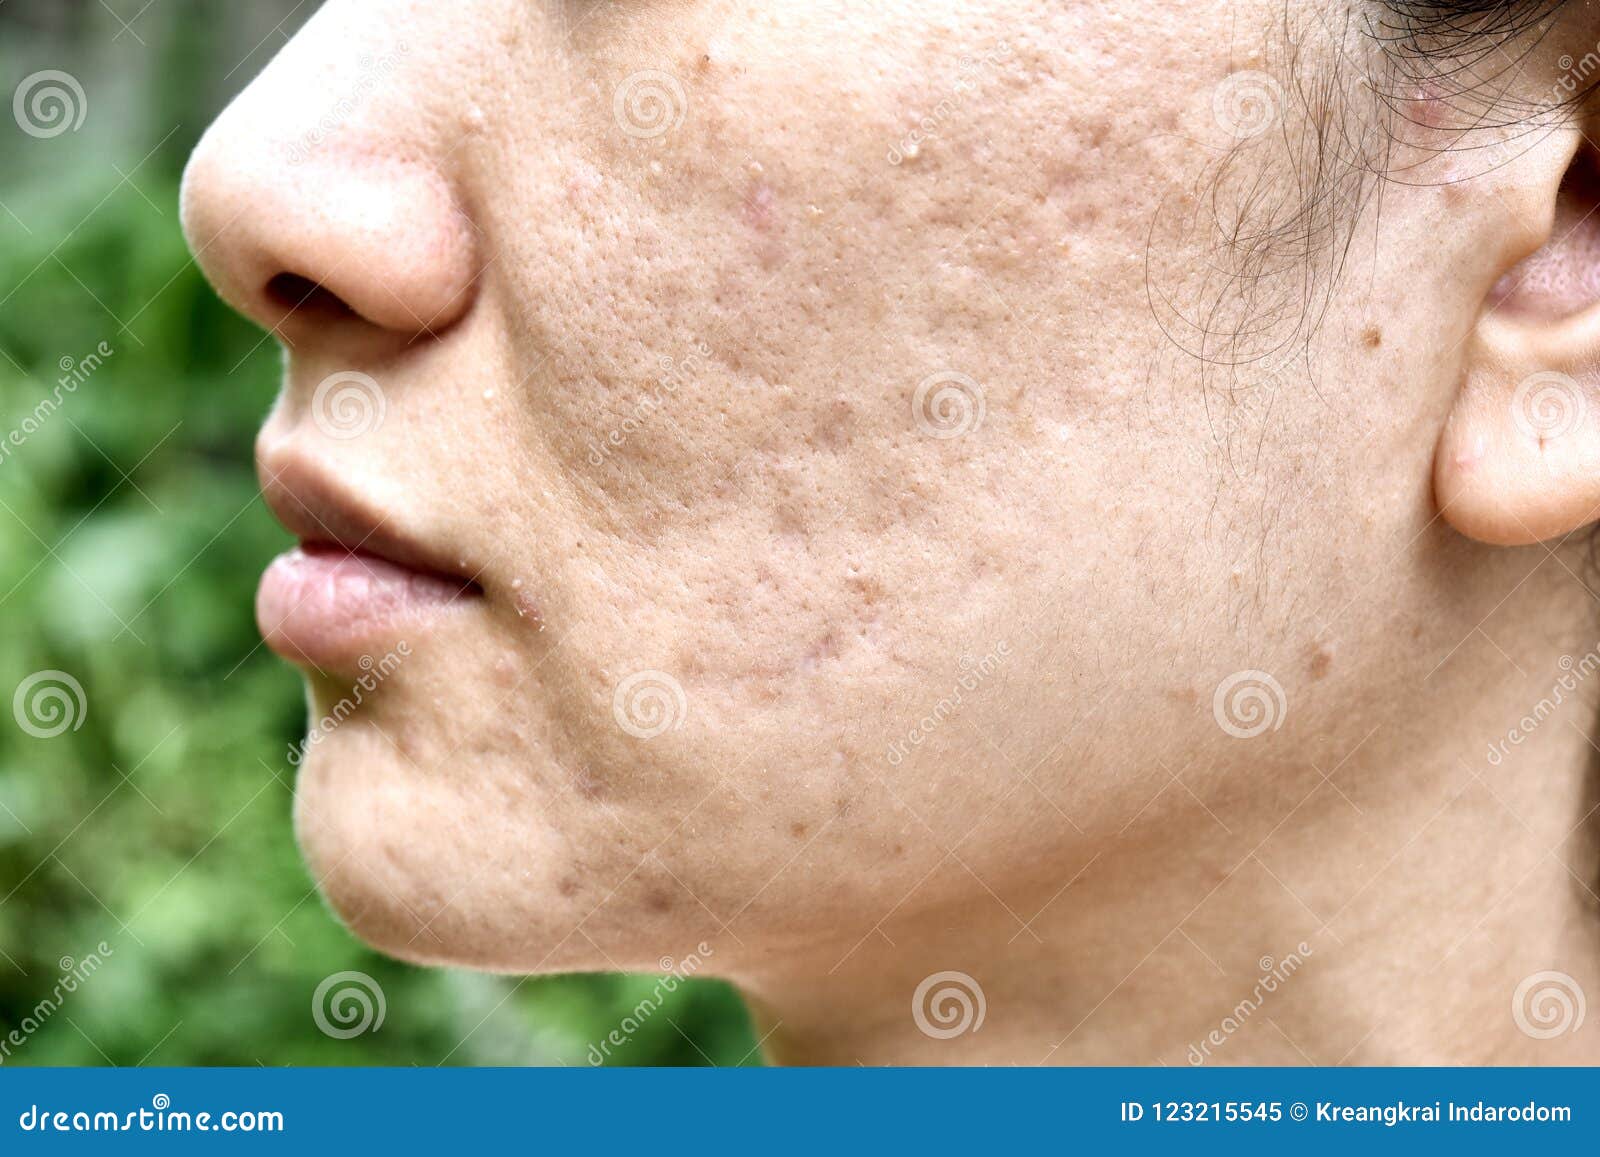 skin problem with acne diseases, close up woman face with whitehead pimples, menstruation breakout.